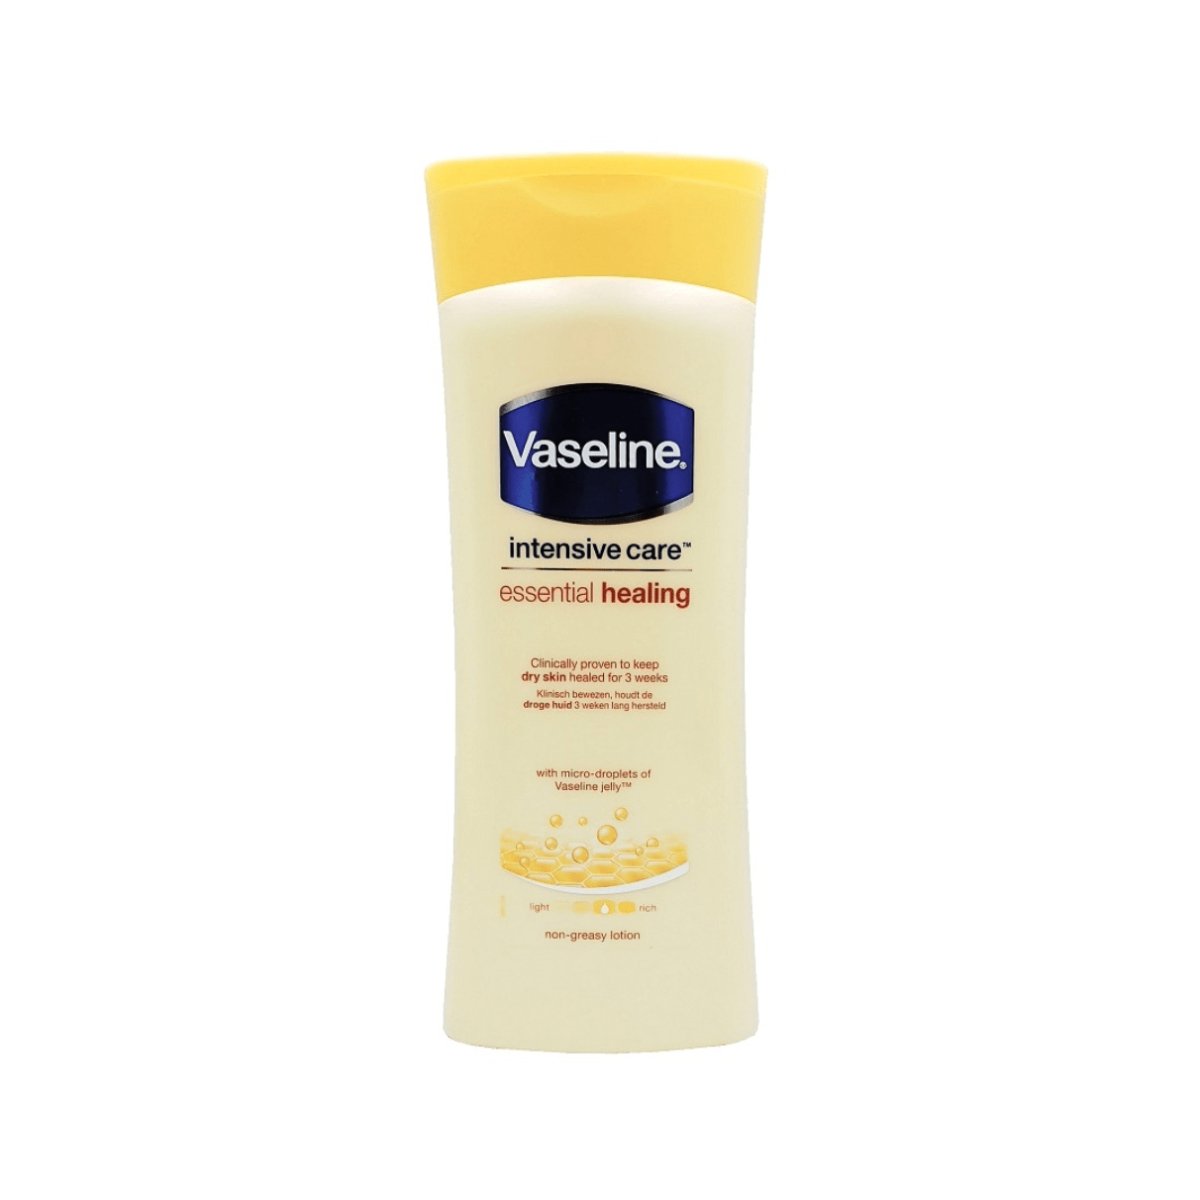 Vaseline Intensive Care Essential Healing Body Lotion 400ml - CosFair GmbH